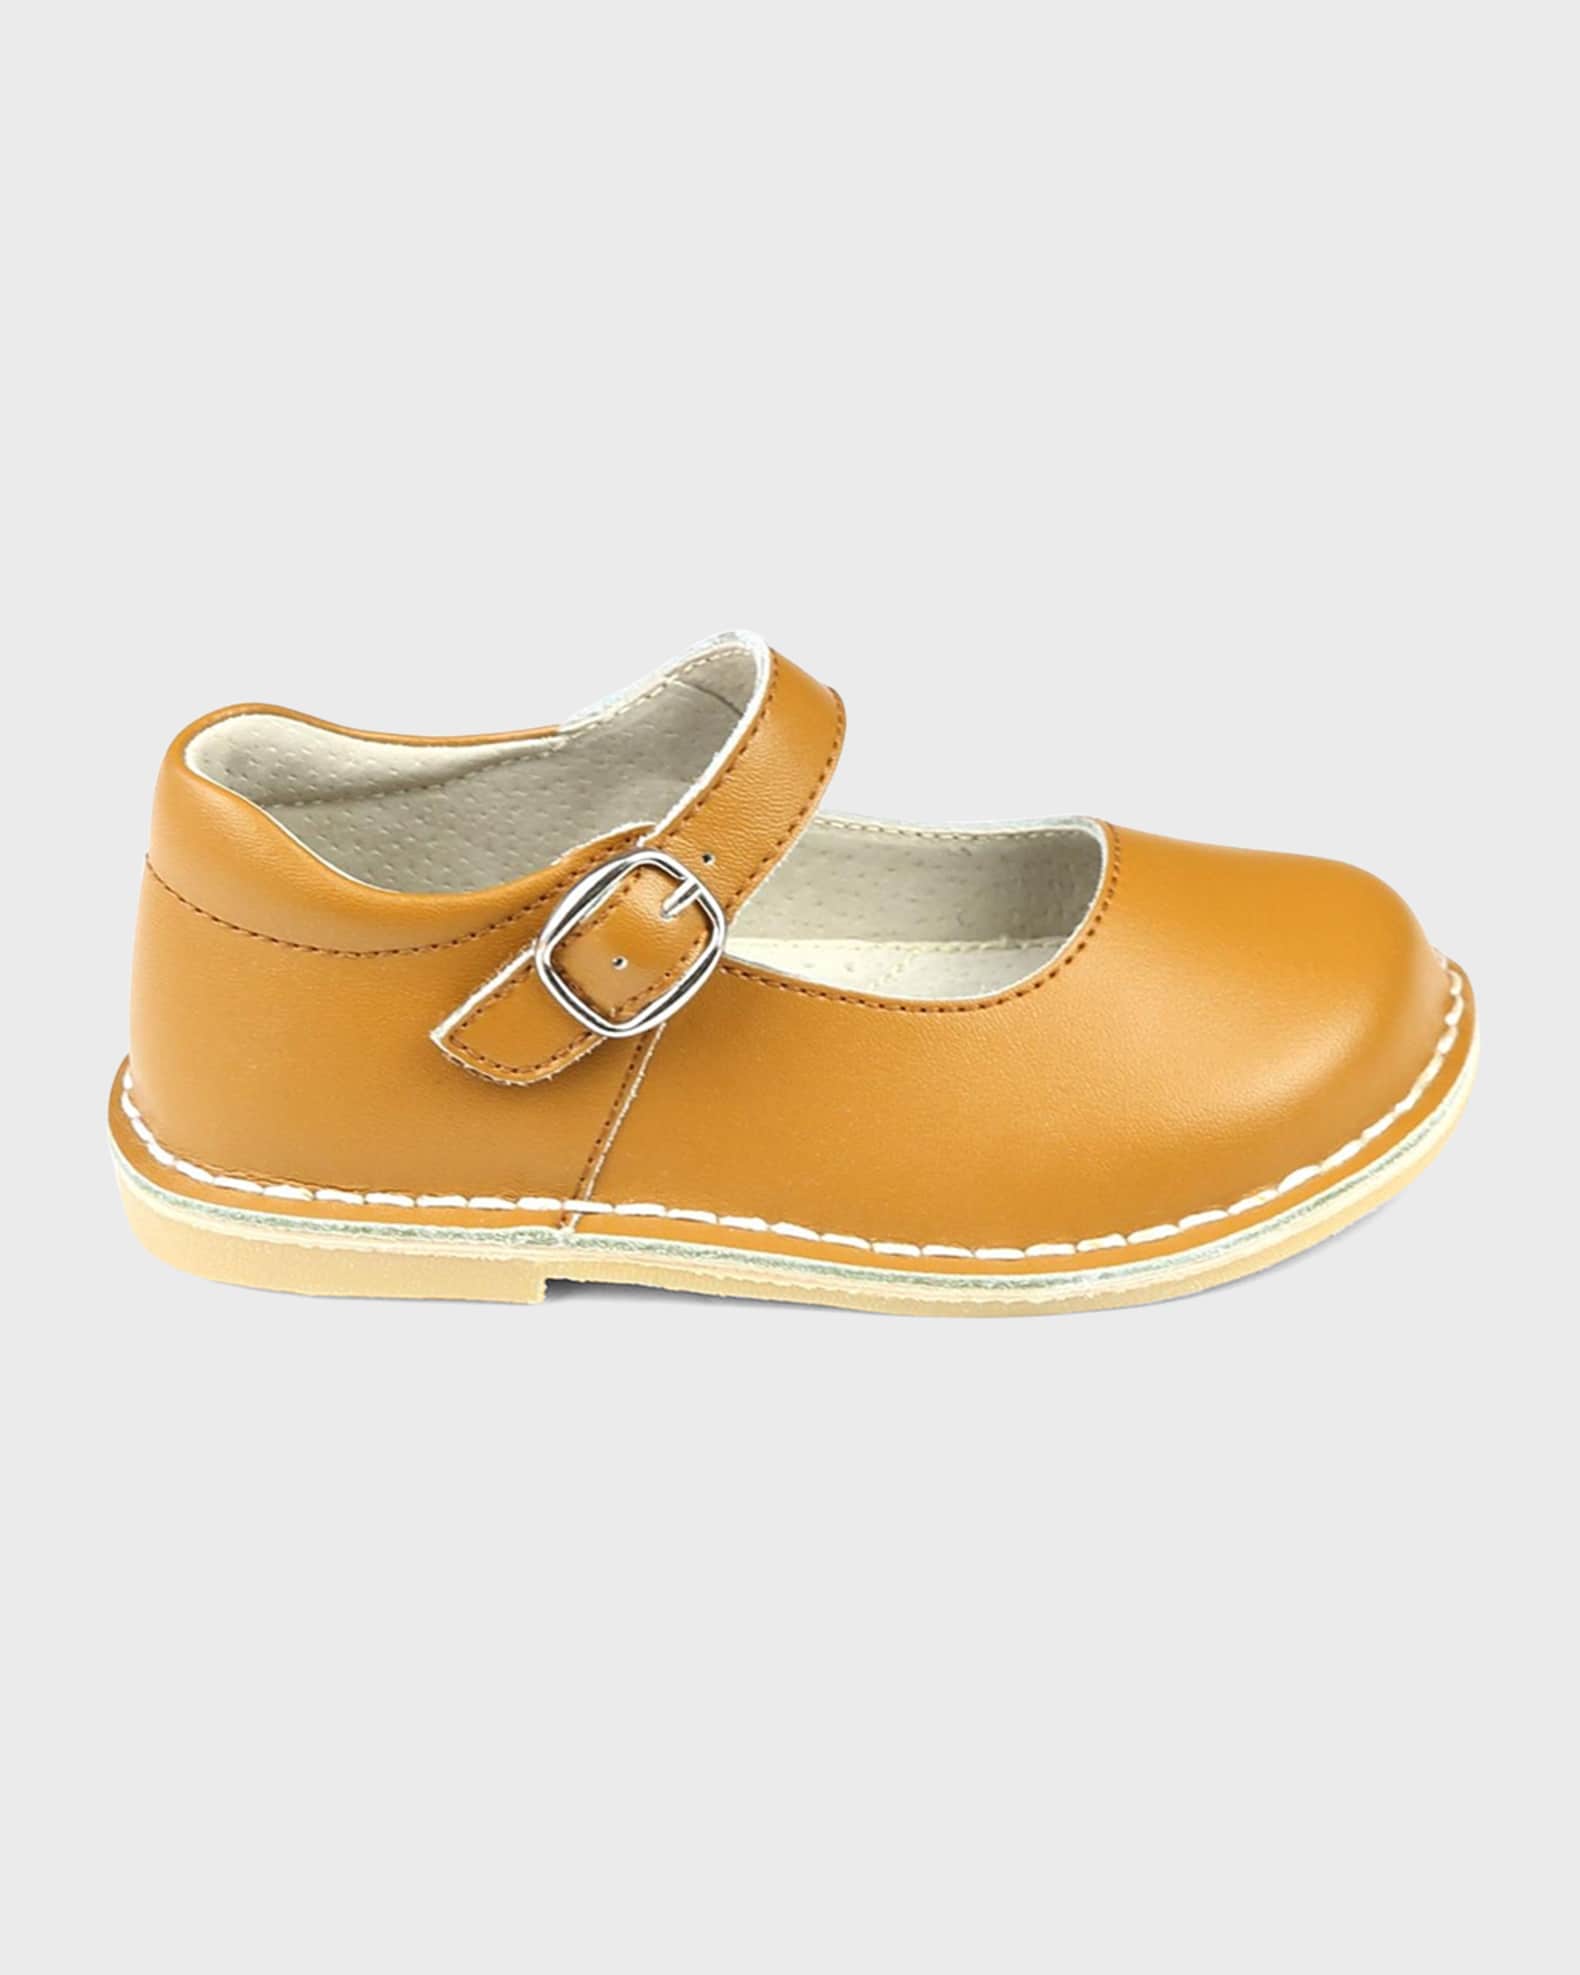 Shoes Grace Mary Jane Leather Shoes, Baby/Toddlers/Kids | Neiman Marcus